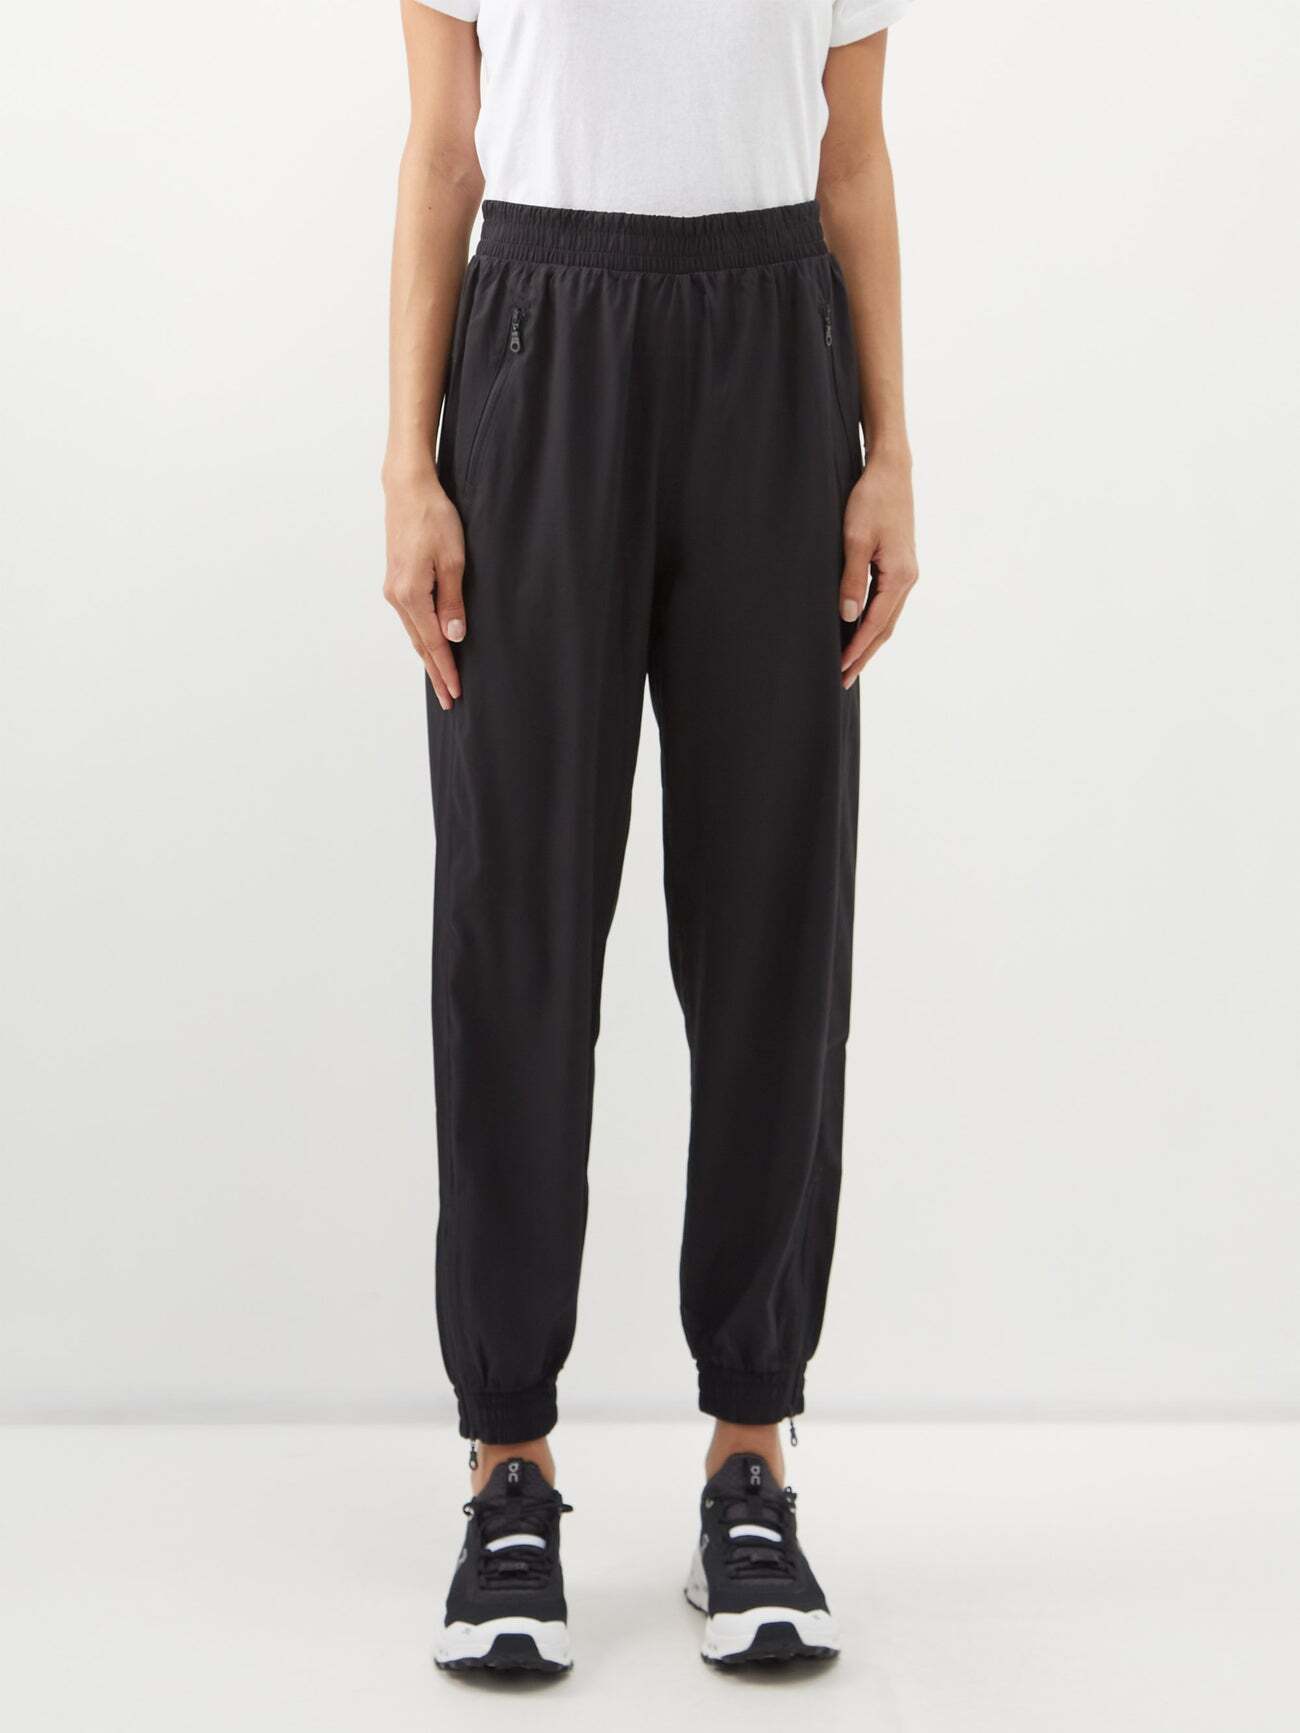 Girlfriend Collective - Summit Track Pants - Womens - Black